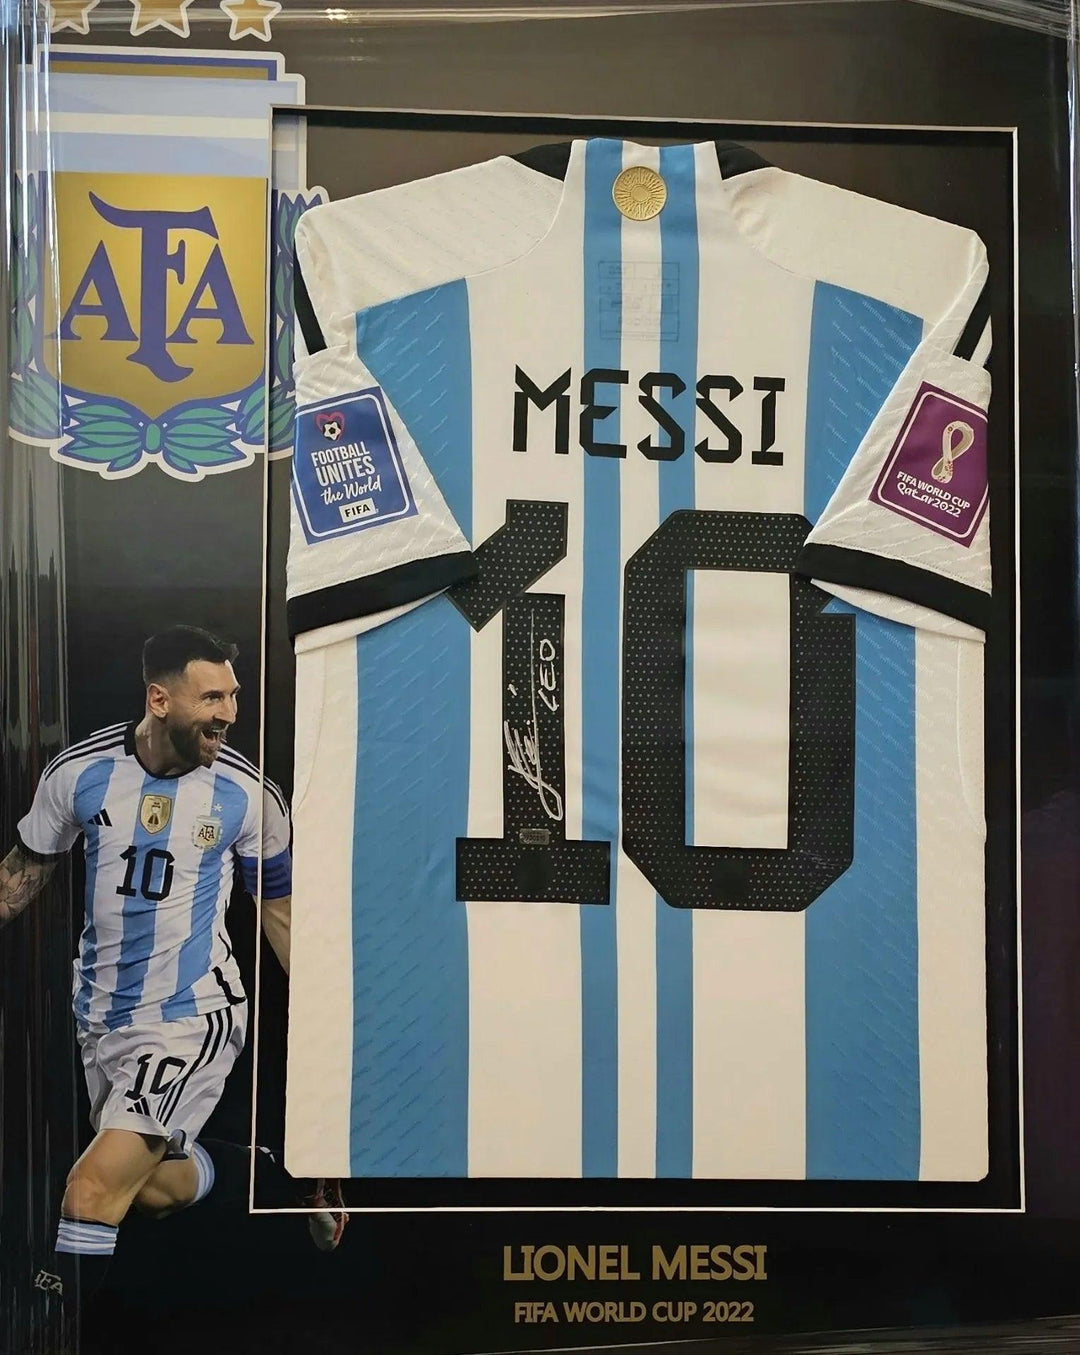 Lionel Messi 10 Argentina 2022 World Cup - Signed Home Soccer Shirt | Iconic Victory Memorabilia